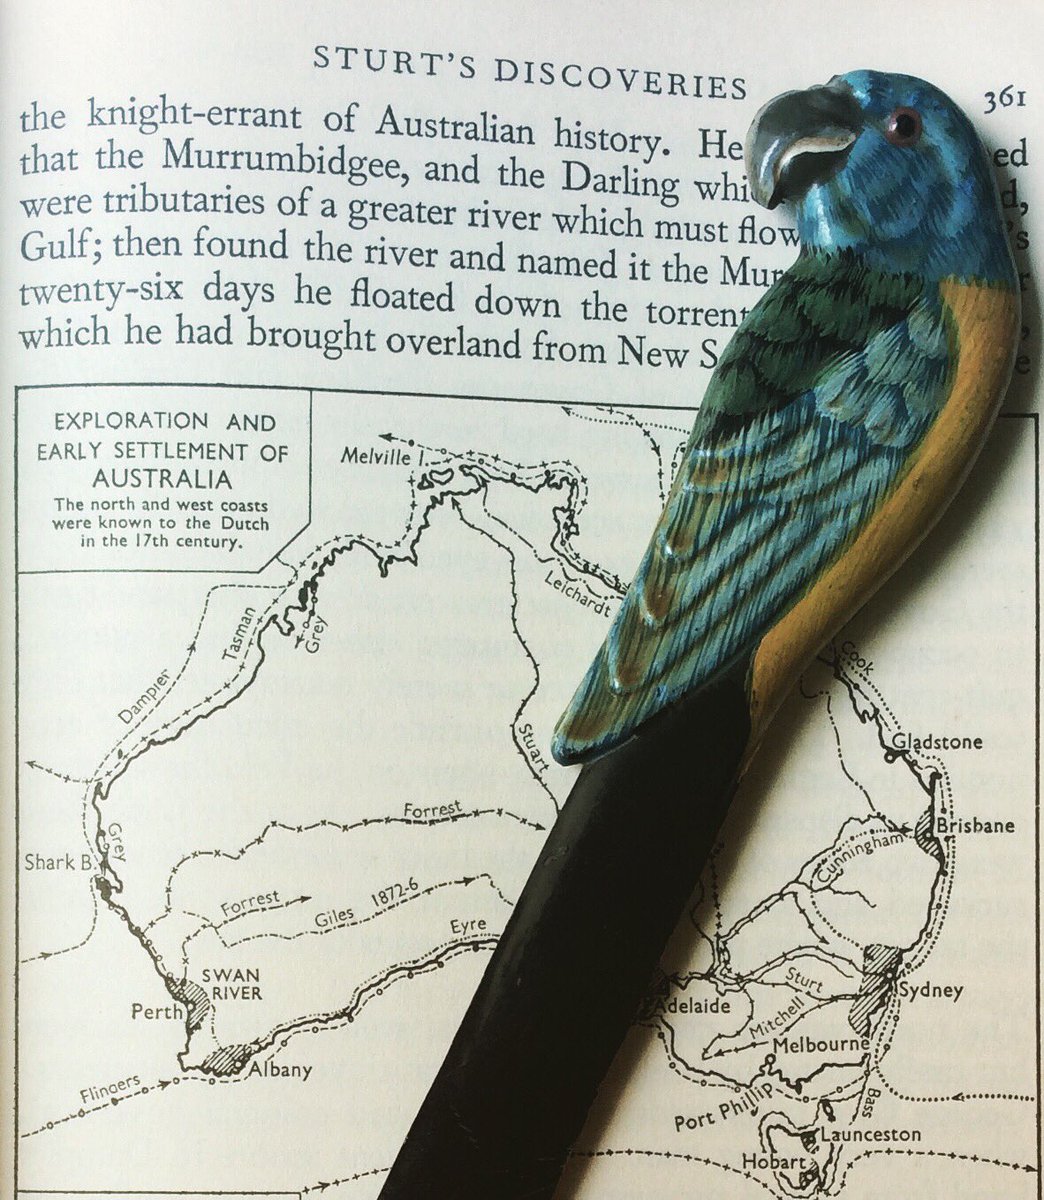 #chasingancestors 029 A keepsake, paper cutter/bookmark from a trip to  Australia
#indianocean #history #art #britishempire #postcolonial #personalhistory #museum #southasia #asia #africa #travel #nonfiction #books #journalist #archives #connections